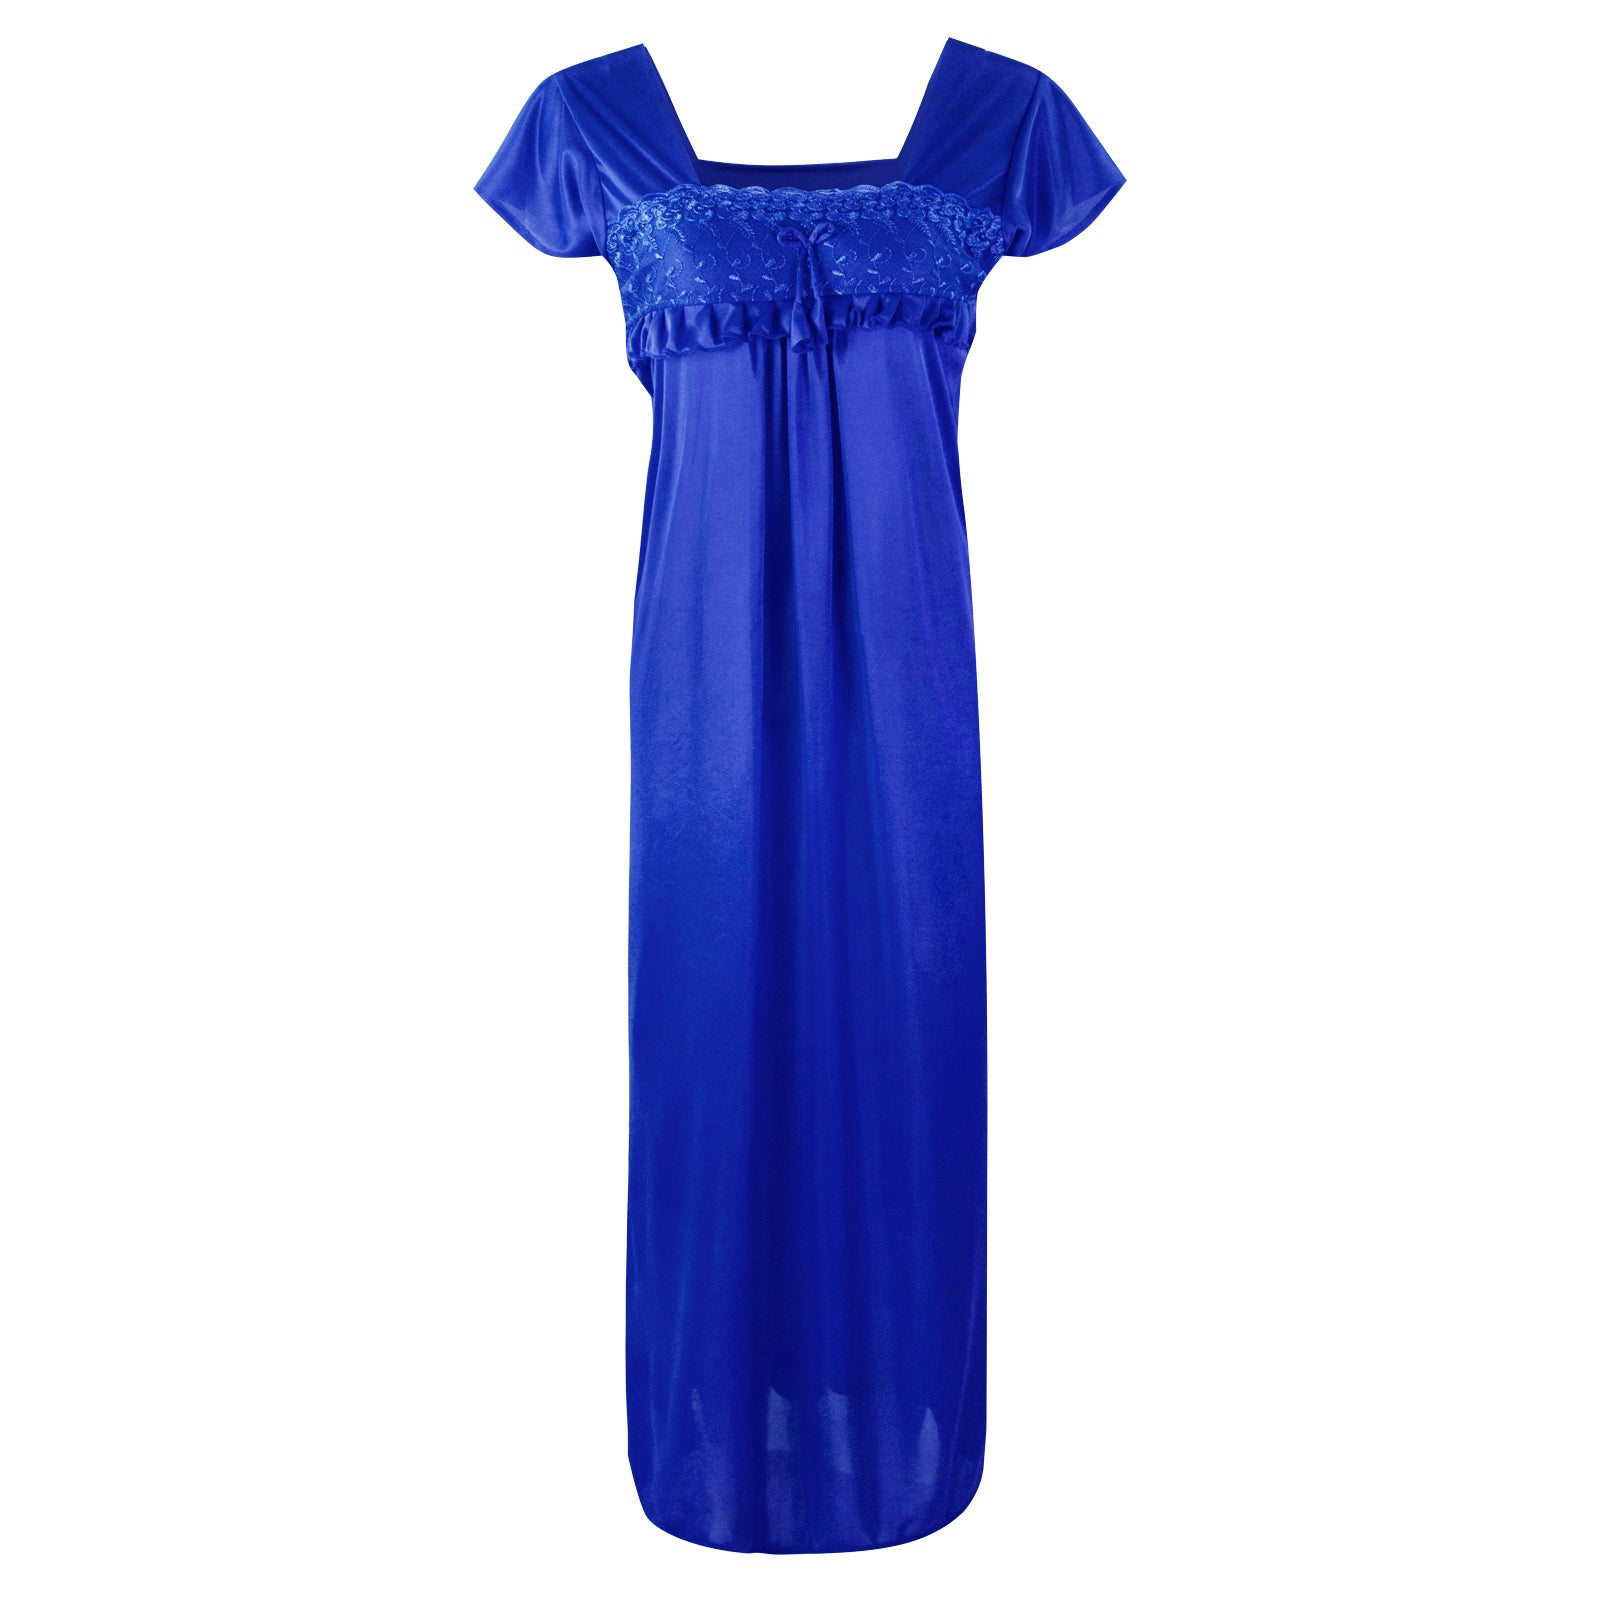 Royal Blue / One Size NEW WOMEN SATIN LONG NIGHTDRESS LADIES NIGHTY CHEMISE EMBROIDERY The Orange Tags